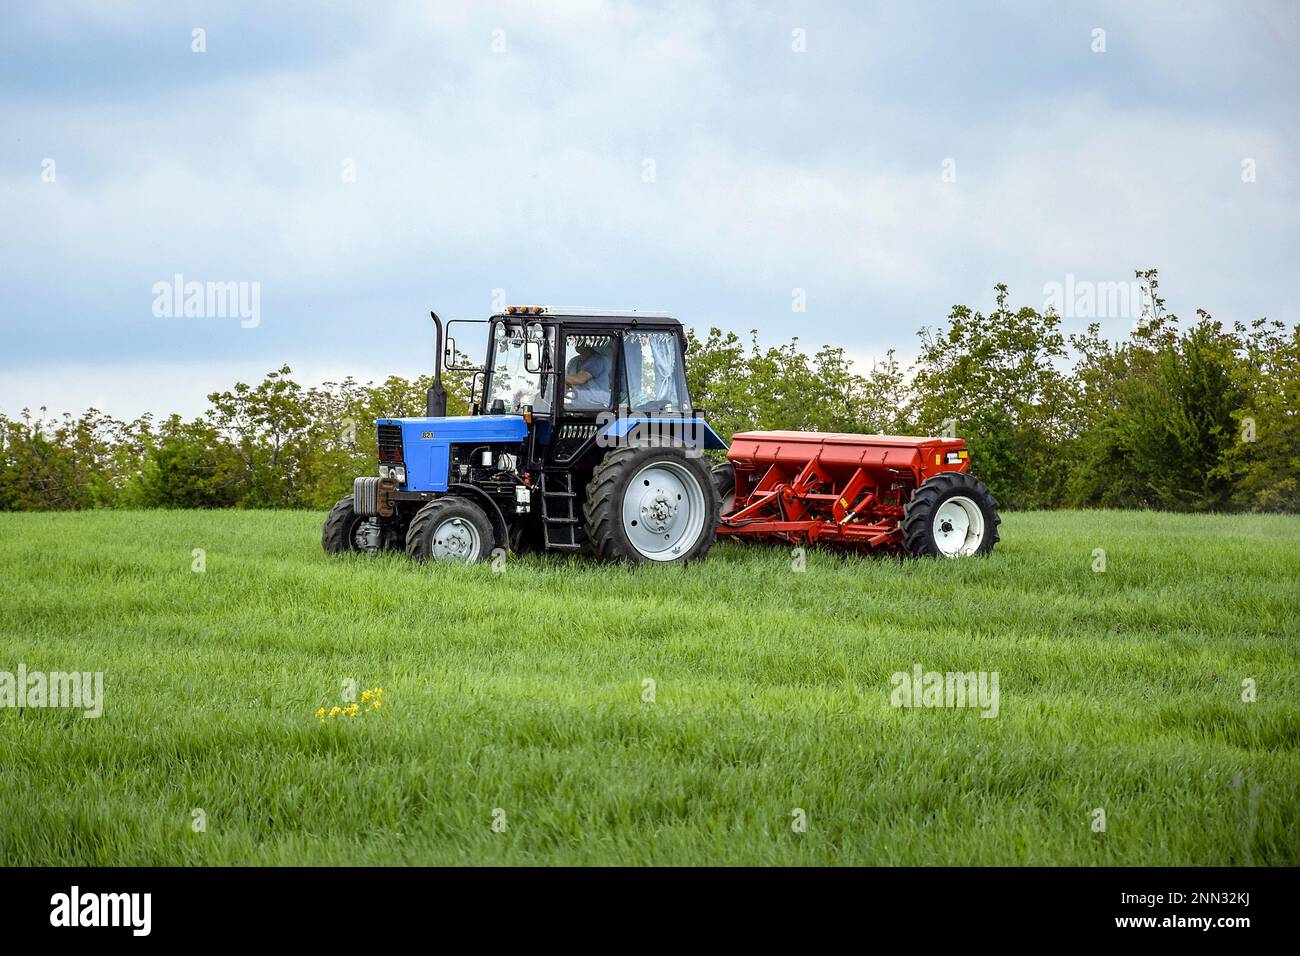 Crop Pouring Chute in Agricultural Machine Stock Image - Image of